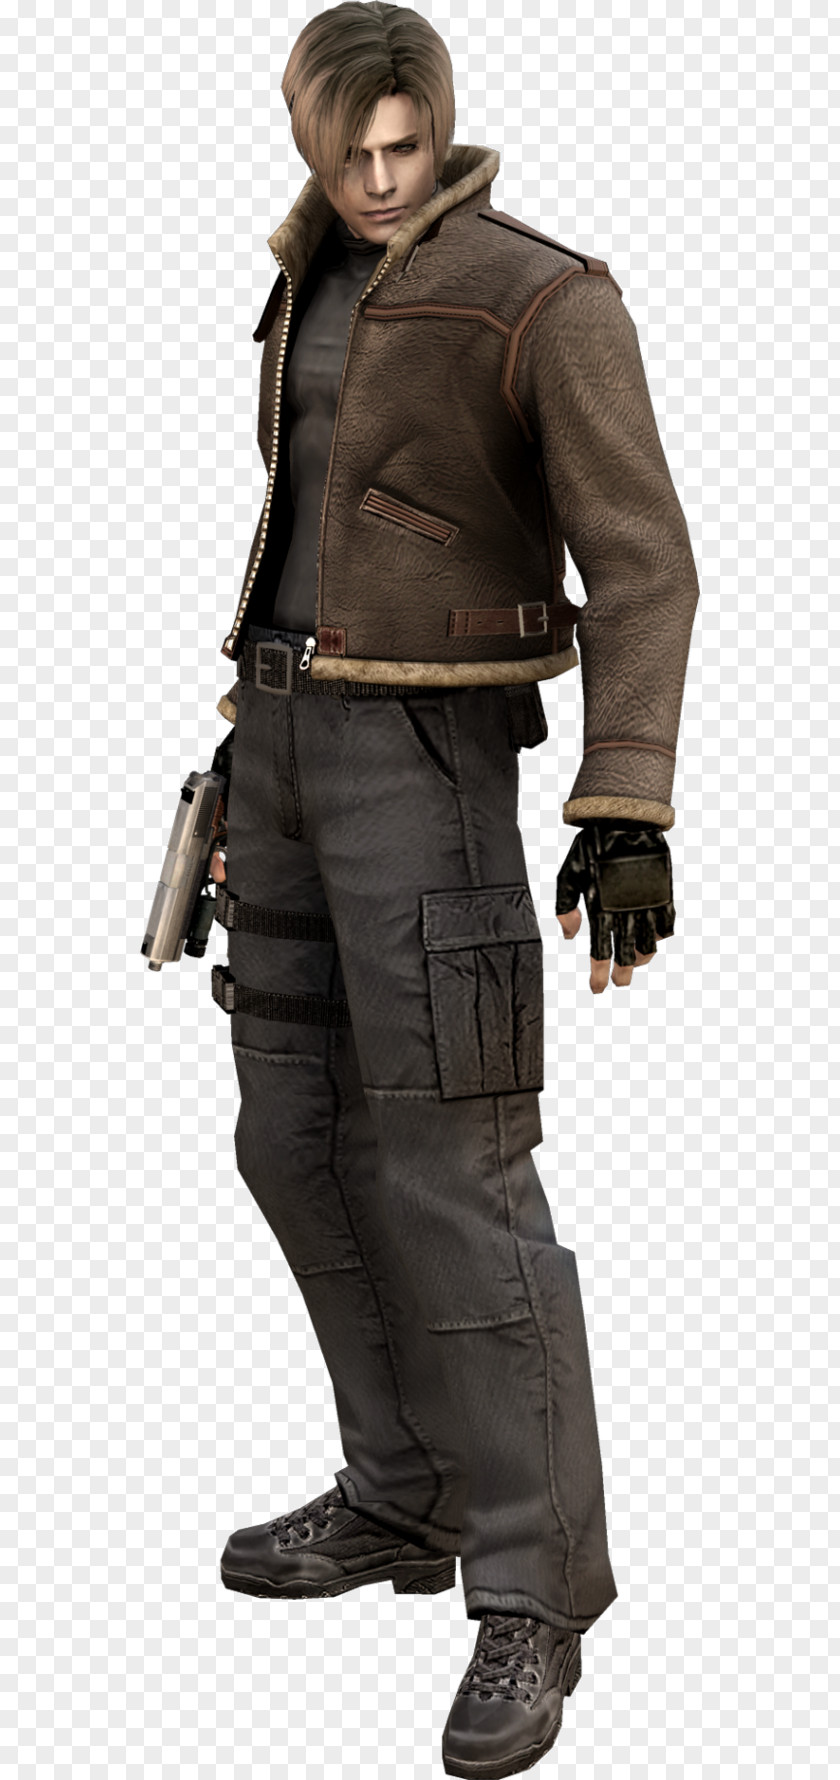 Leon Resident Evil 4 6 2 Minecraft S. Kennedy PNG